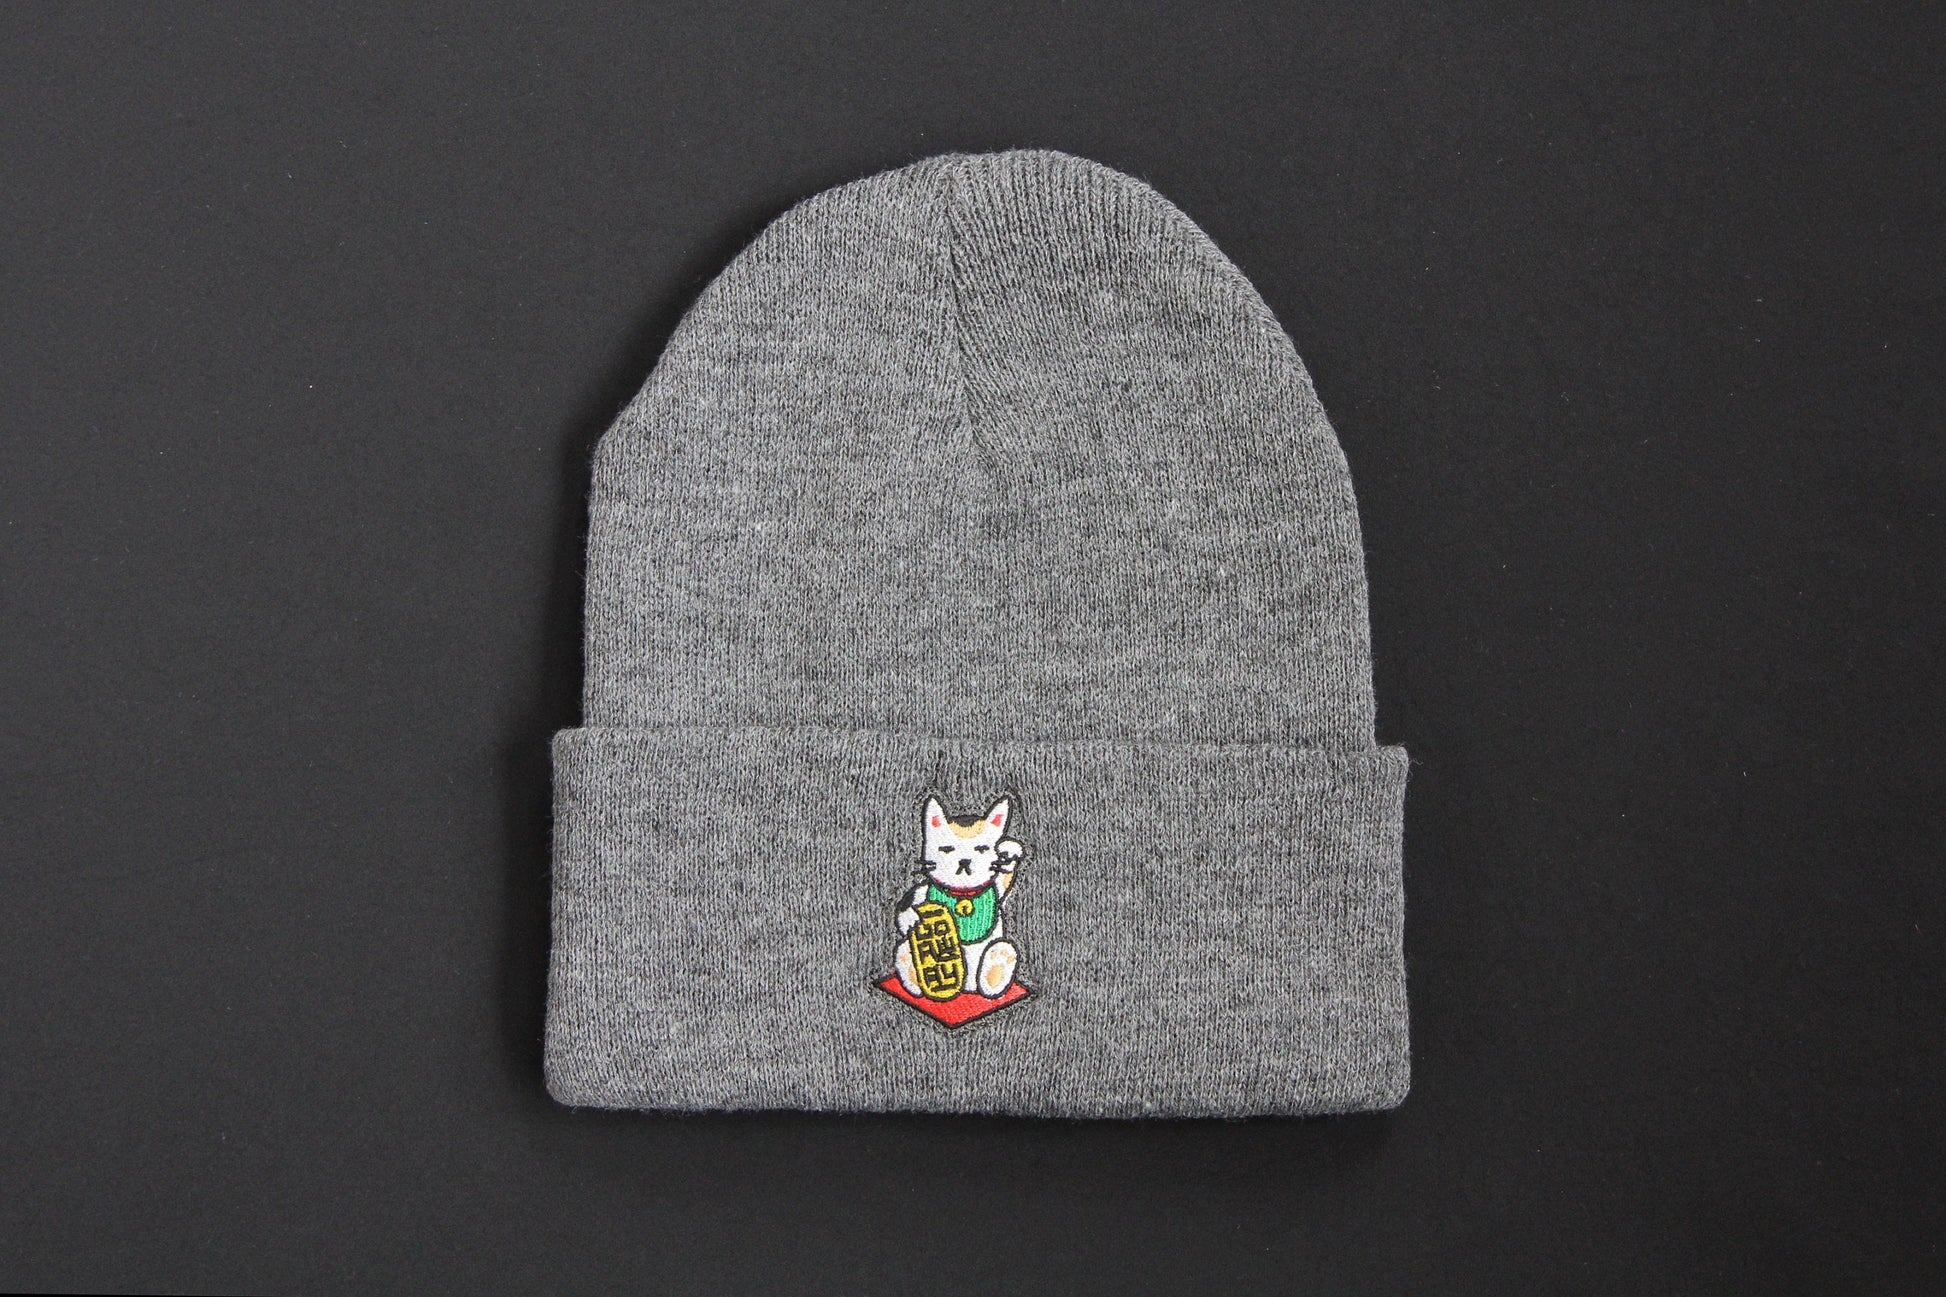 A cuffed charcoal grey beanie with an embroidered maneki neko cat holding a gold bar that says "Go Away" on a black background. 